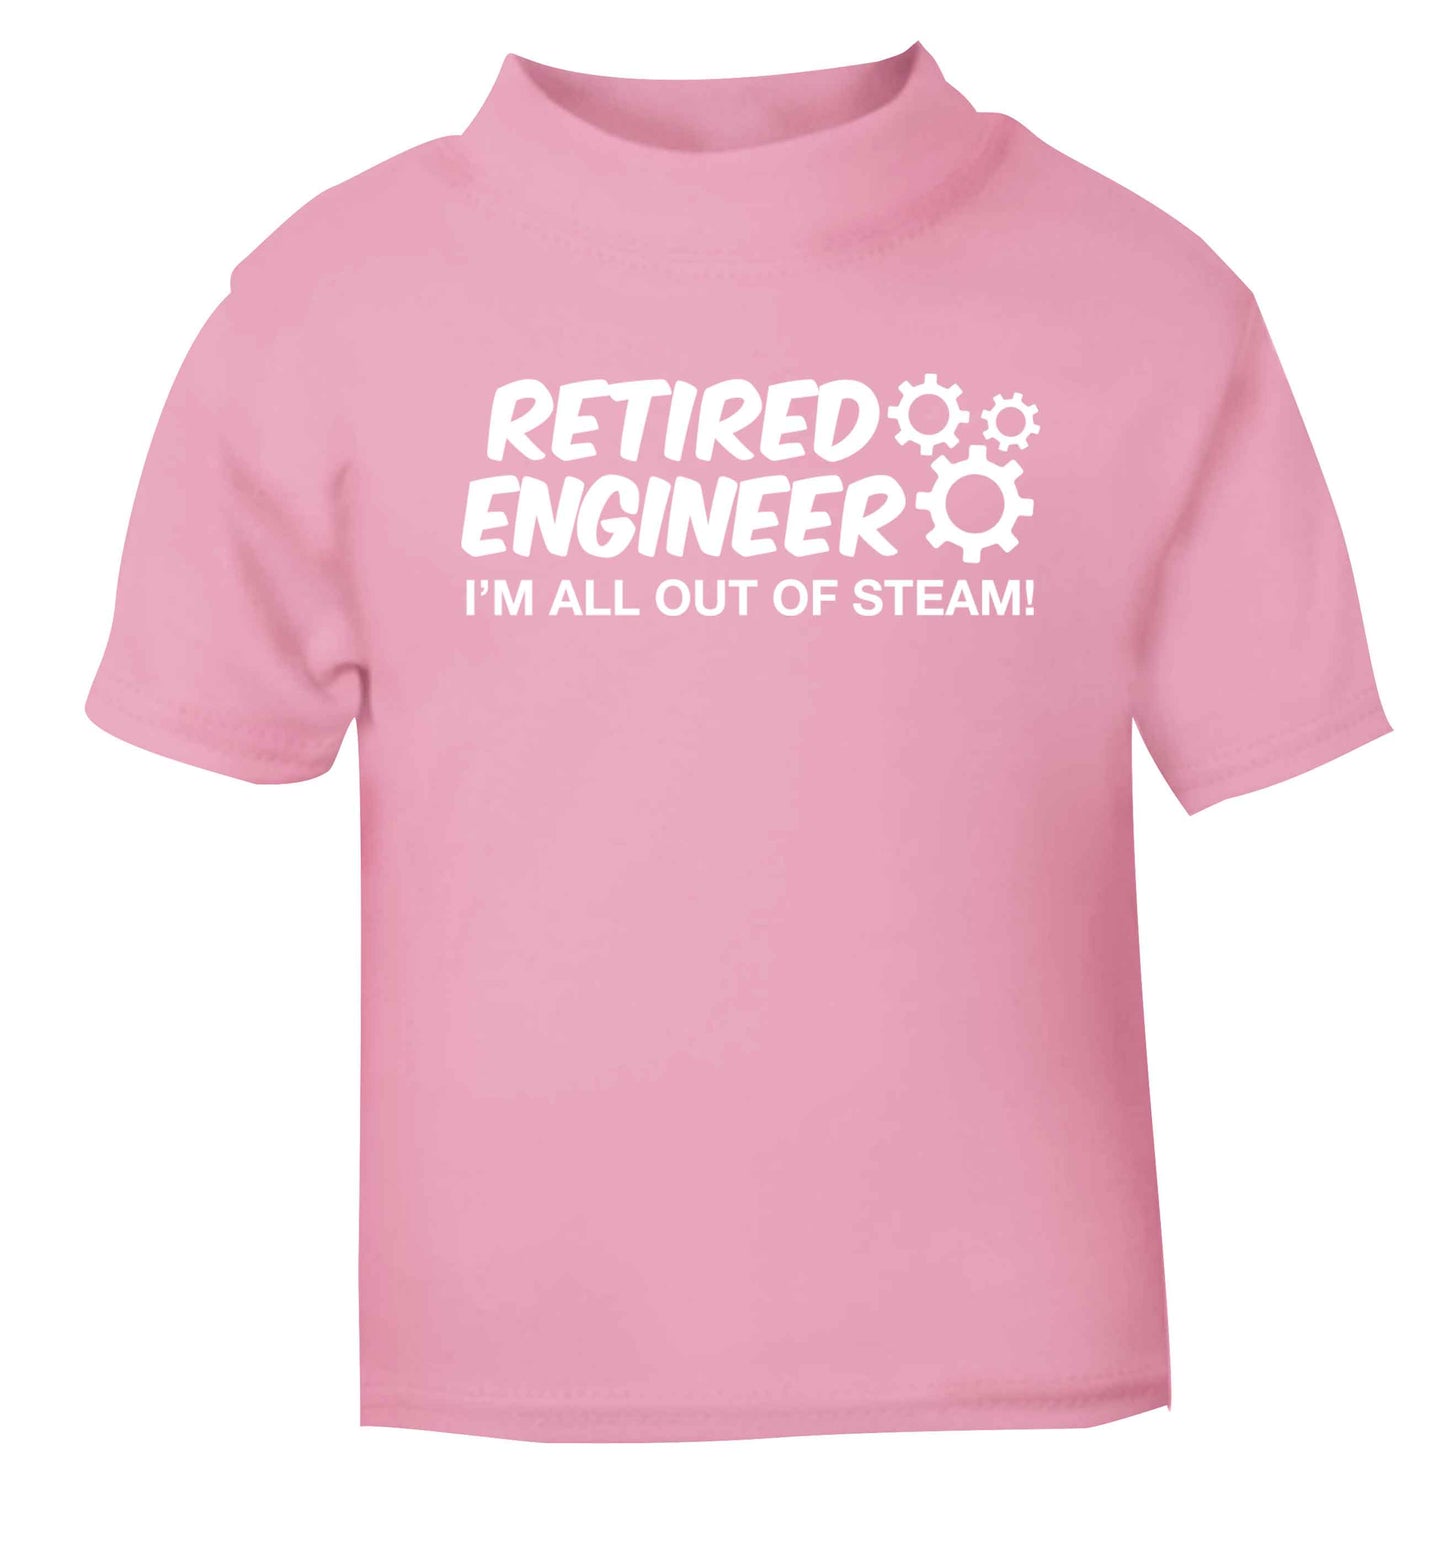 Retired engineer I'm all out of steam light pink Baby Toddler Tshirt 2 Years